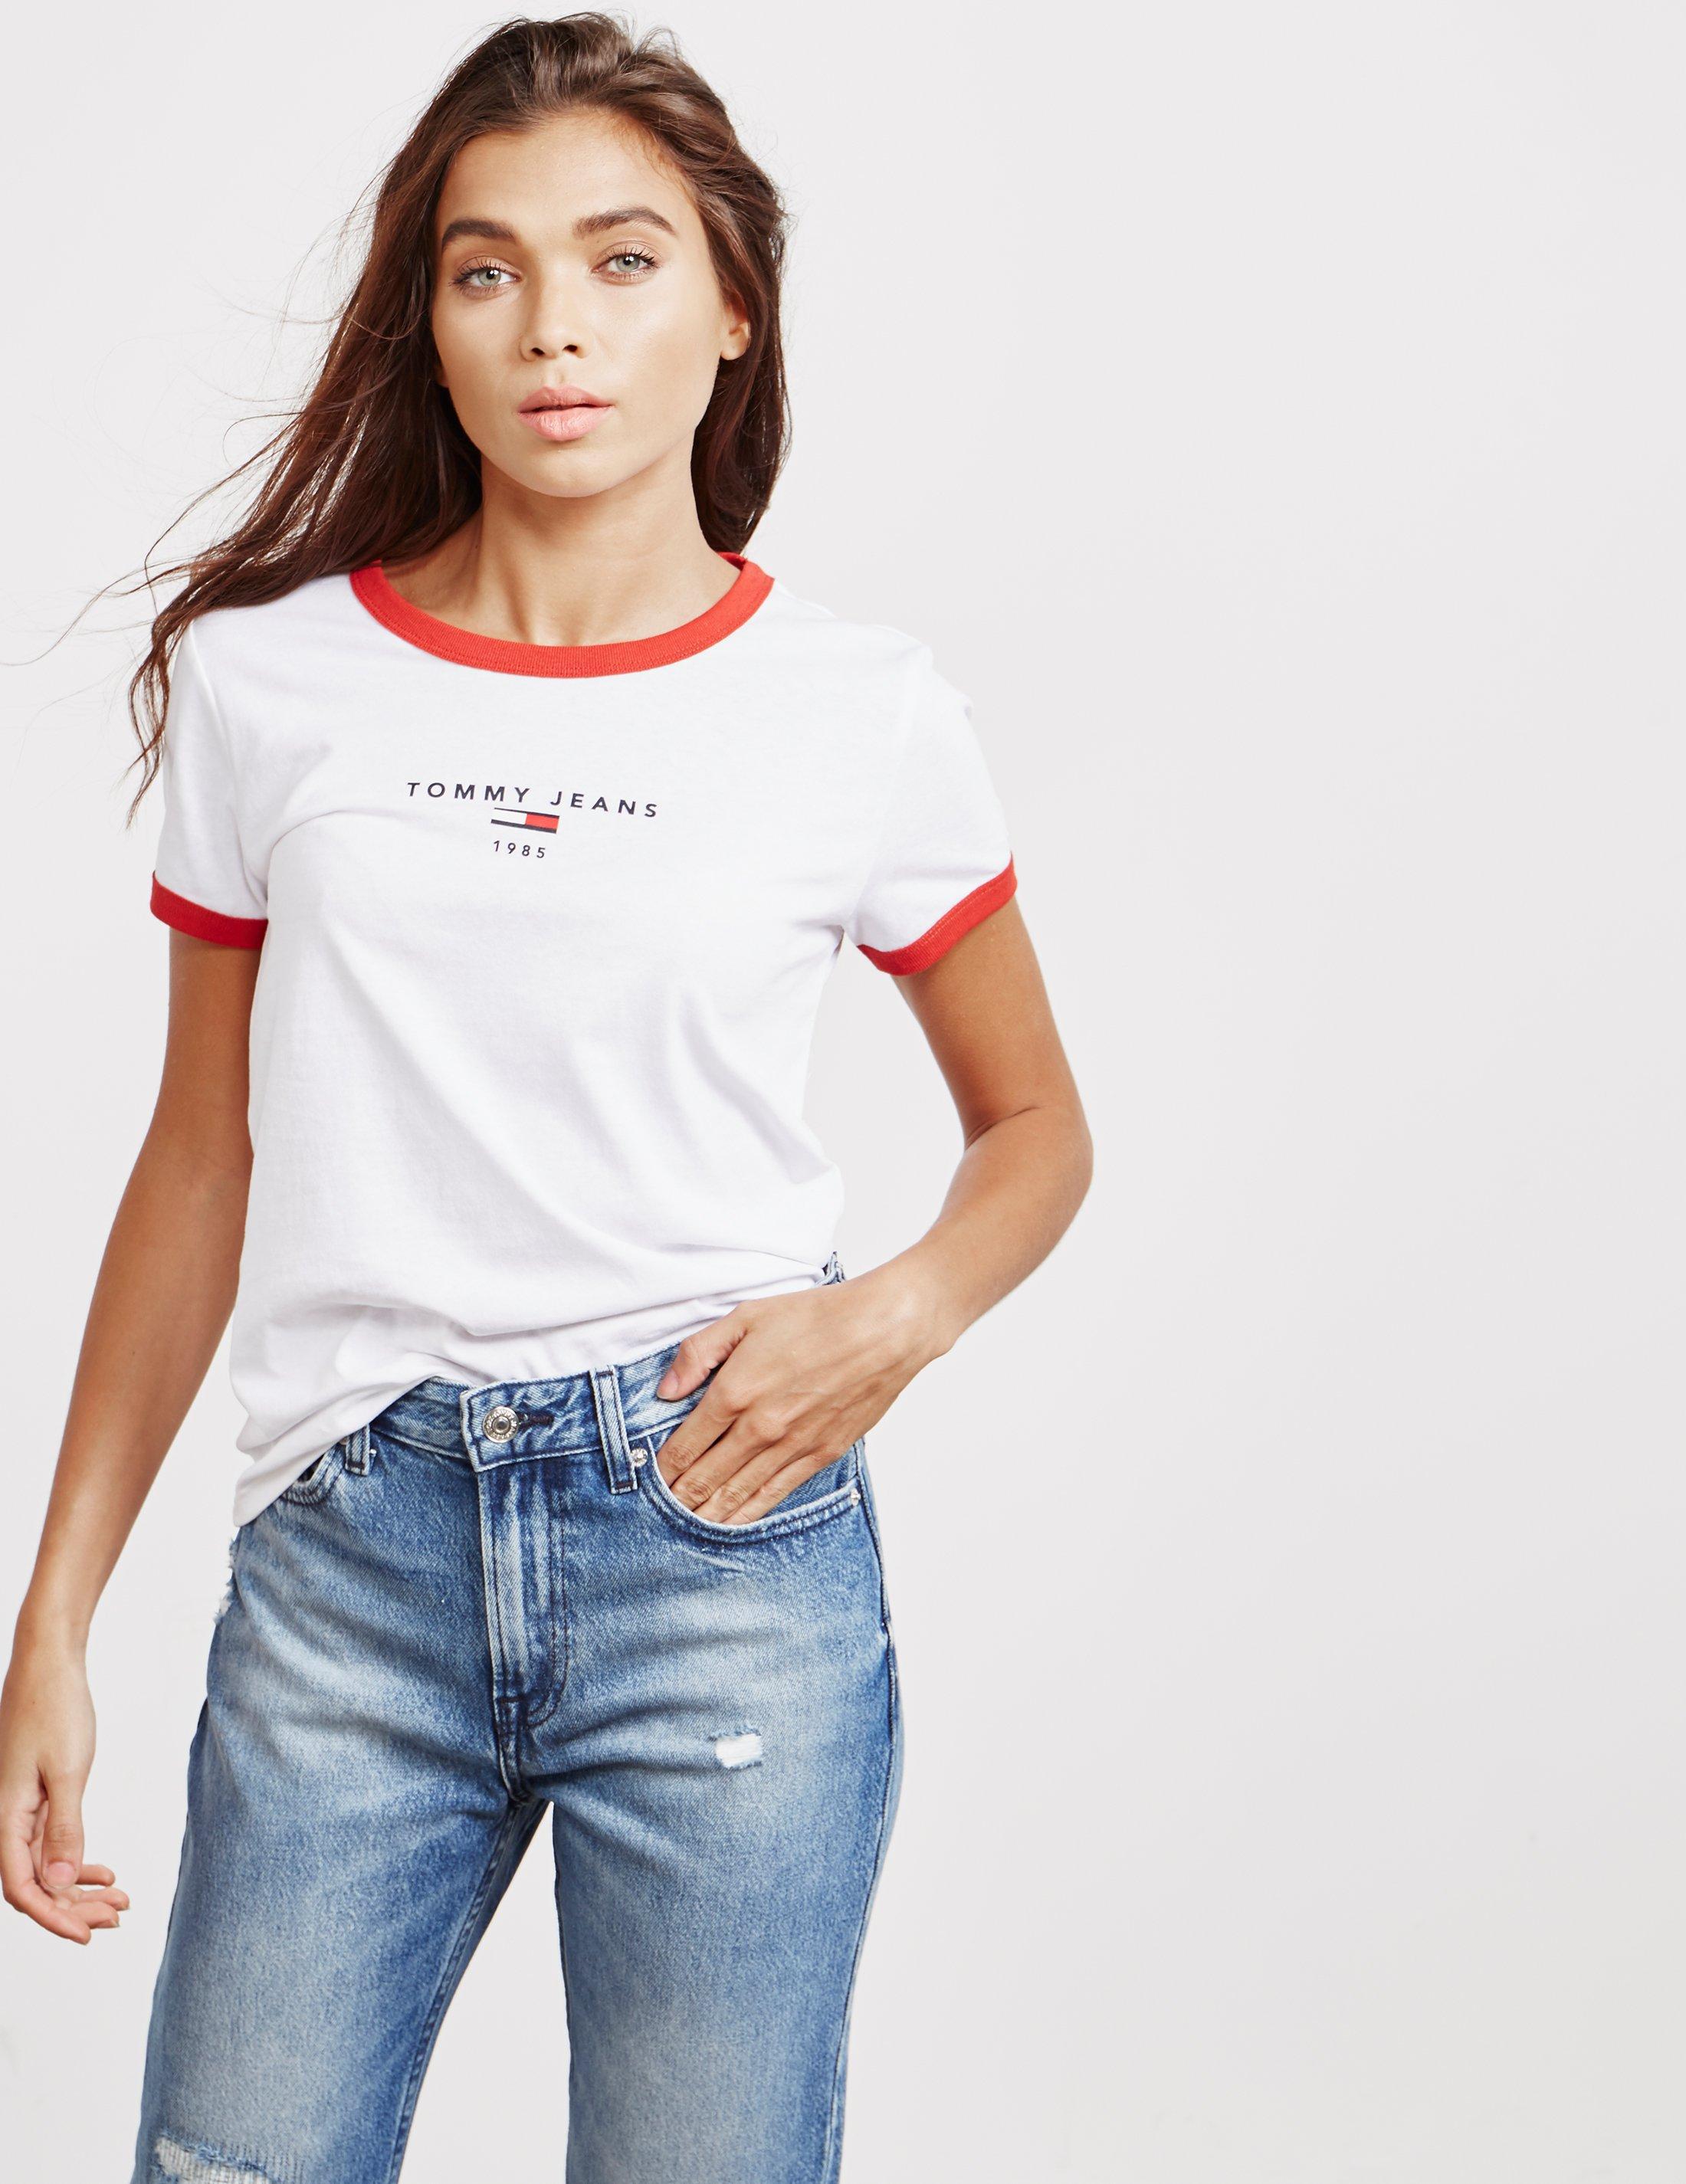 tommy jeans womens top